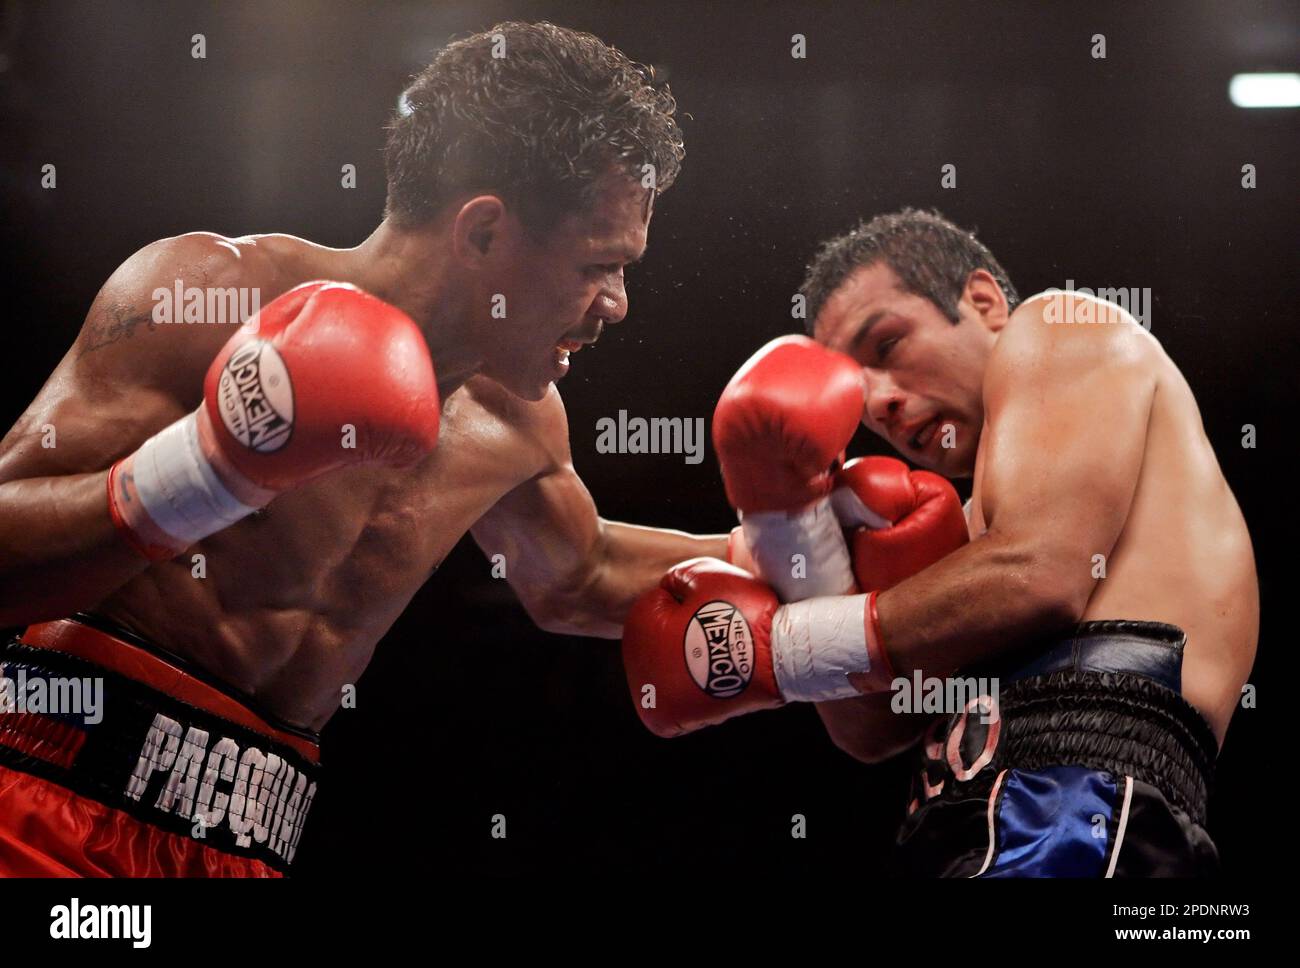 https://c8.alamy.com/comp/2PDNRW3/the-philippines-bobby-pacquiao-left-lands-a-left-to-the-head-of-carlos-hernandez-from-west-covina-calif-in-the-fourth-round-of-their-ten-round-super-featherweight-bout-in-las-vegas-saturday-oct-8-2005-pacquiao-went-on-to-win-the-fight-by-a-split-decision-ap-photokevork-djansezian-2PDNRW3.jpg